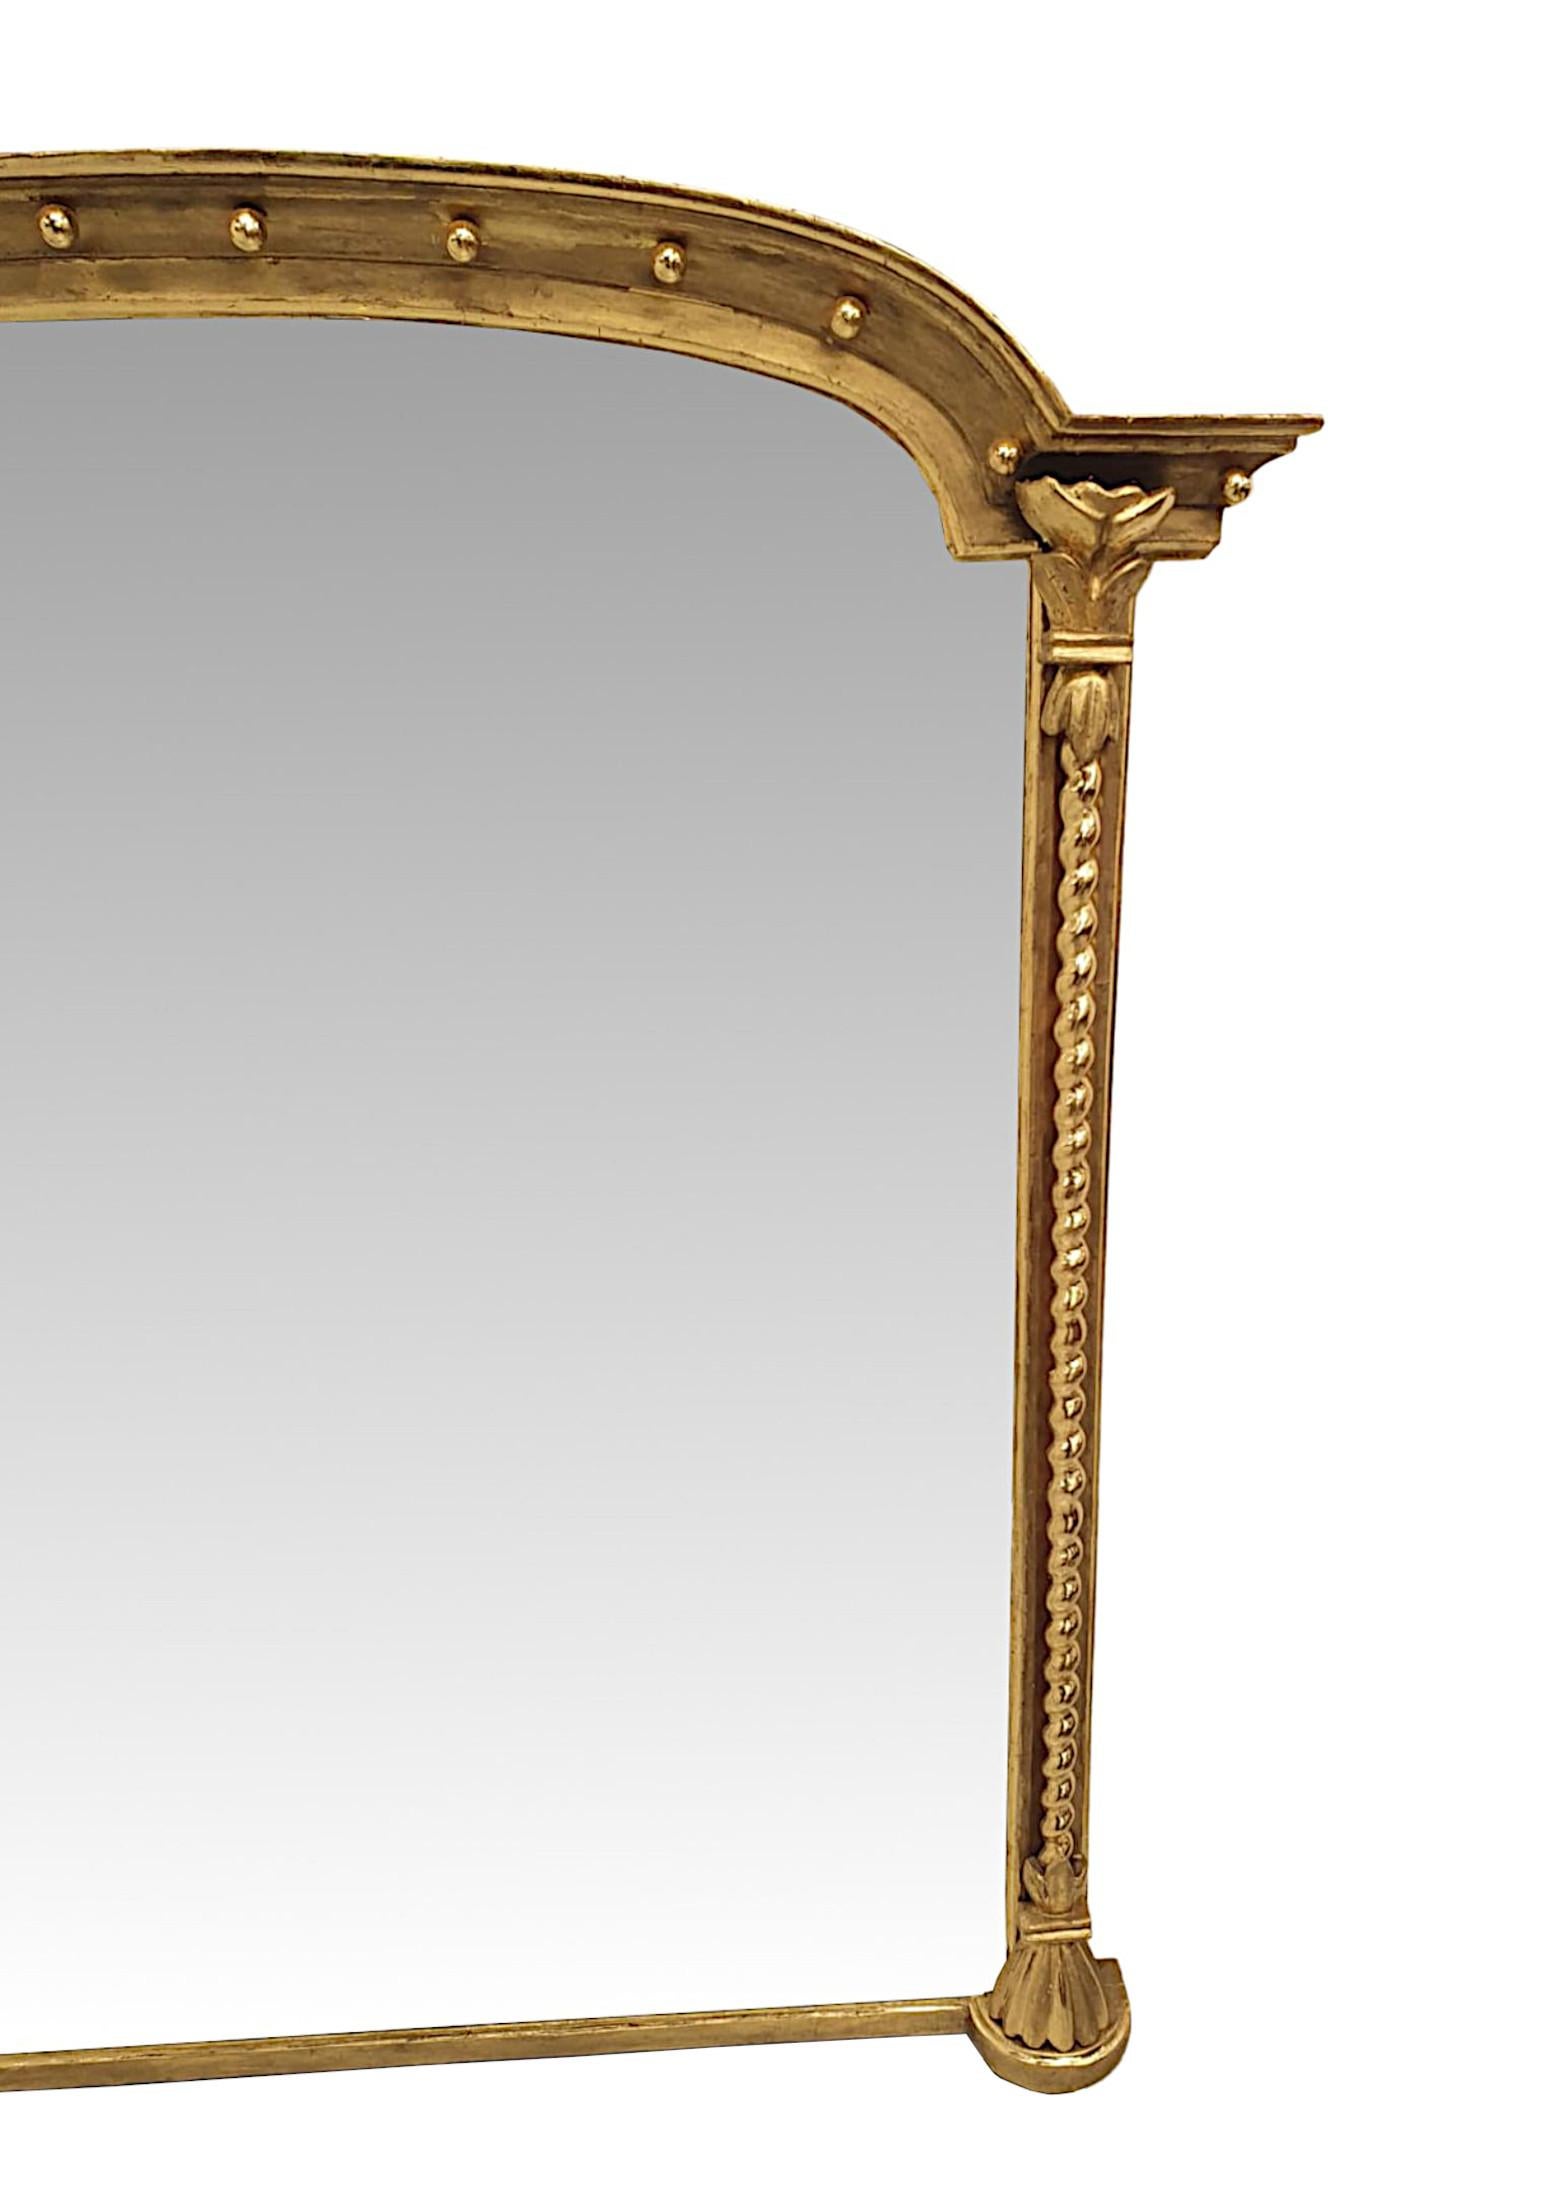 English A Stunning 19th Century Giltwood Overmantle Mirror For Sale